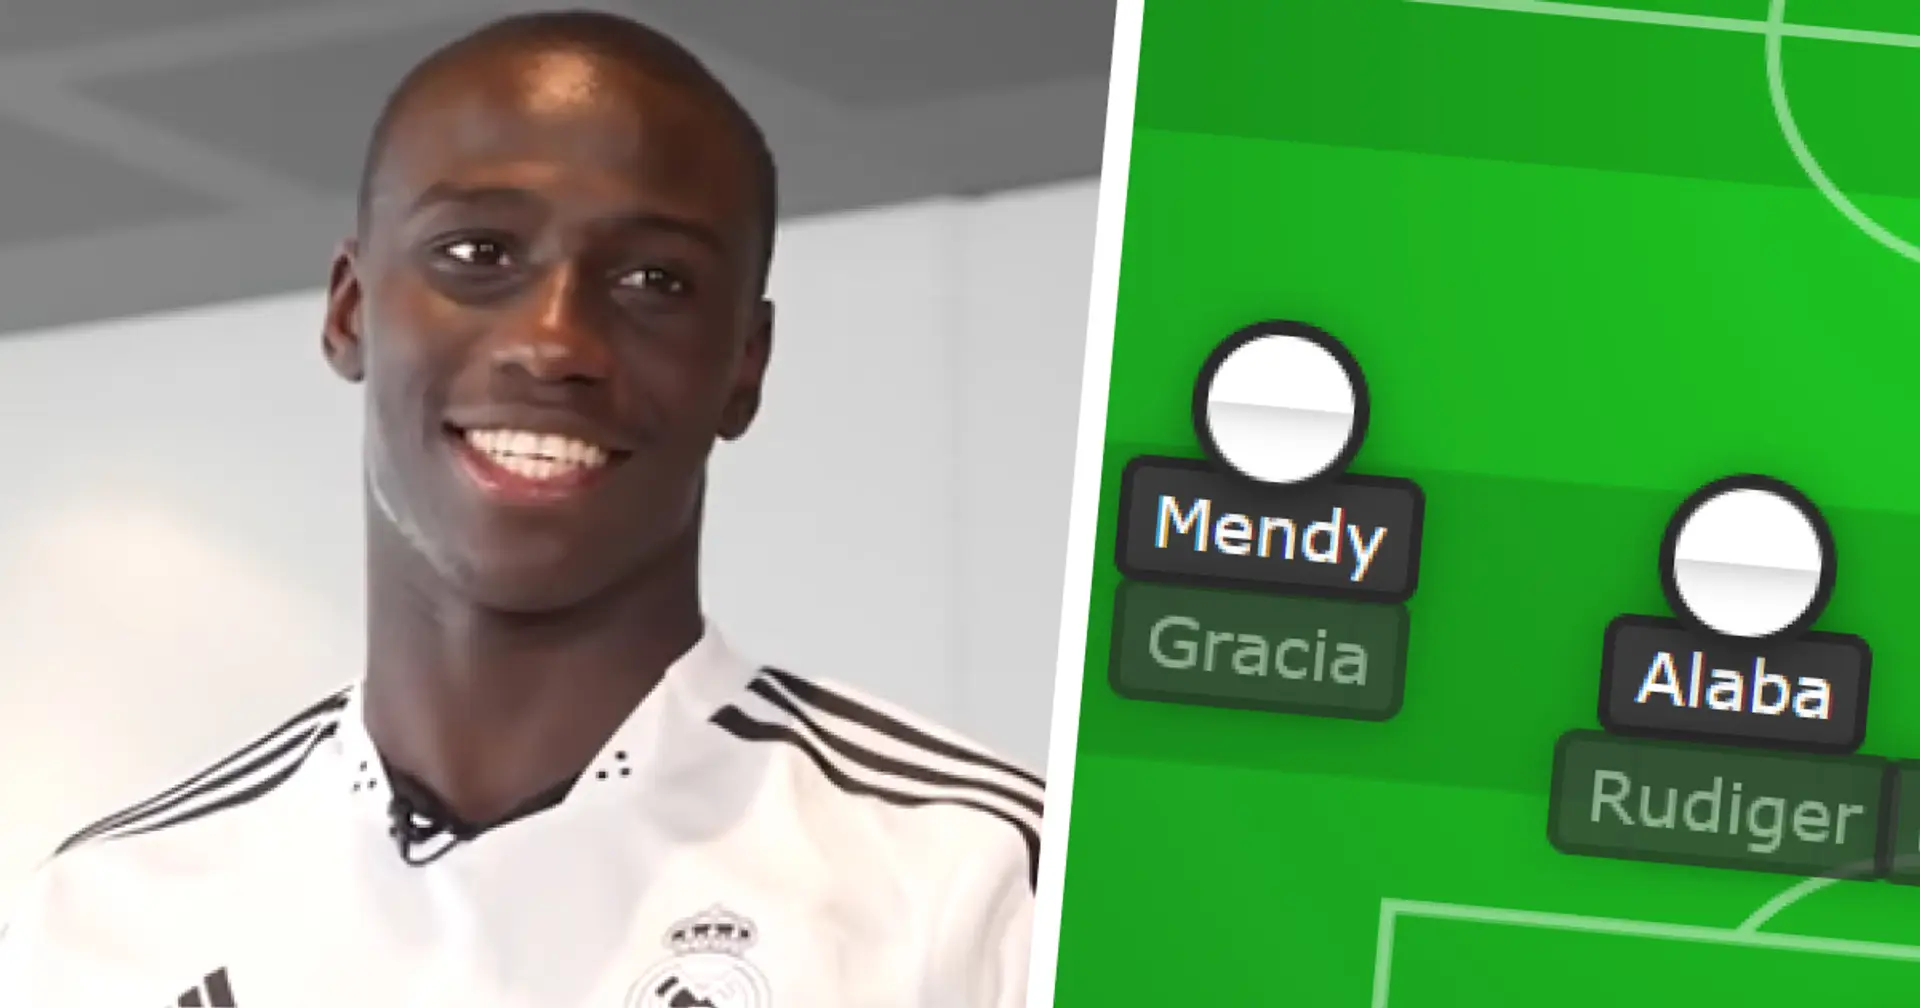 Mendy to continue at left-back: Real Madrid squad depth in defence shown 